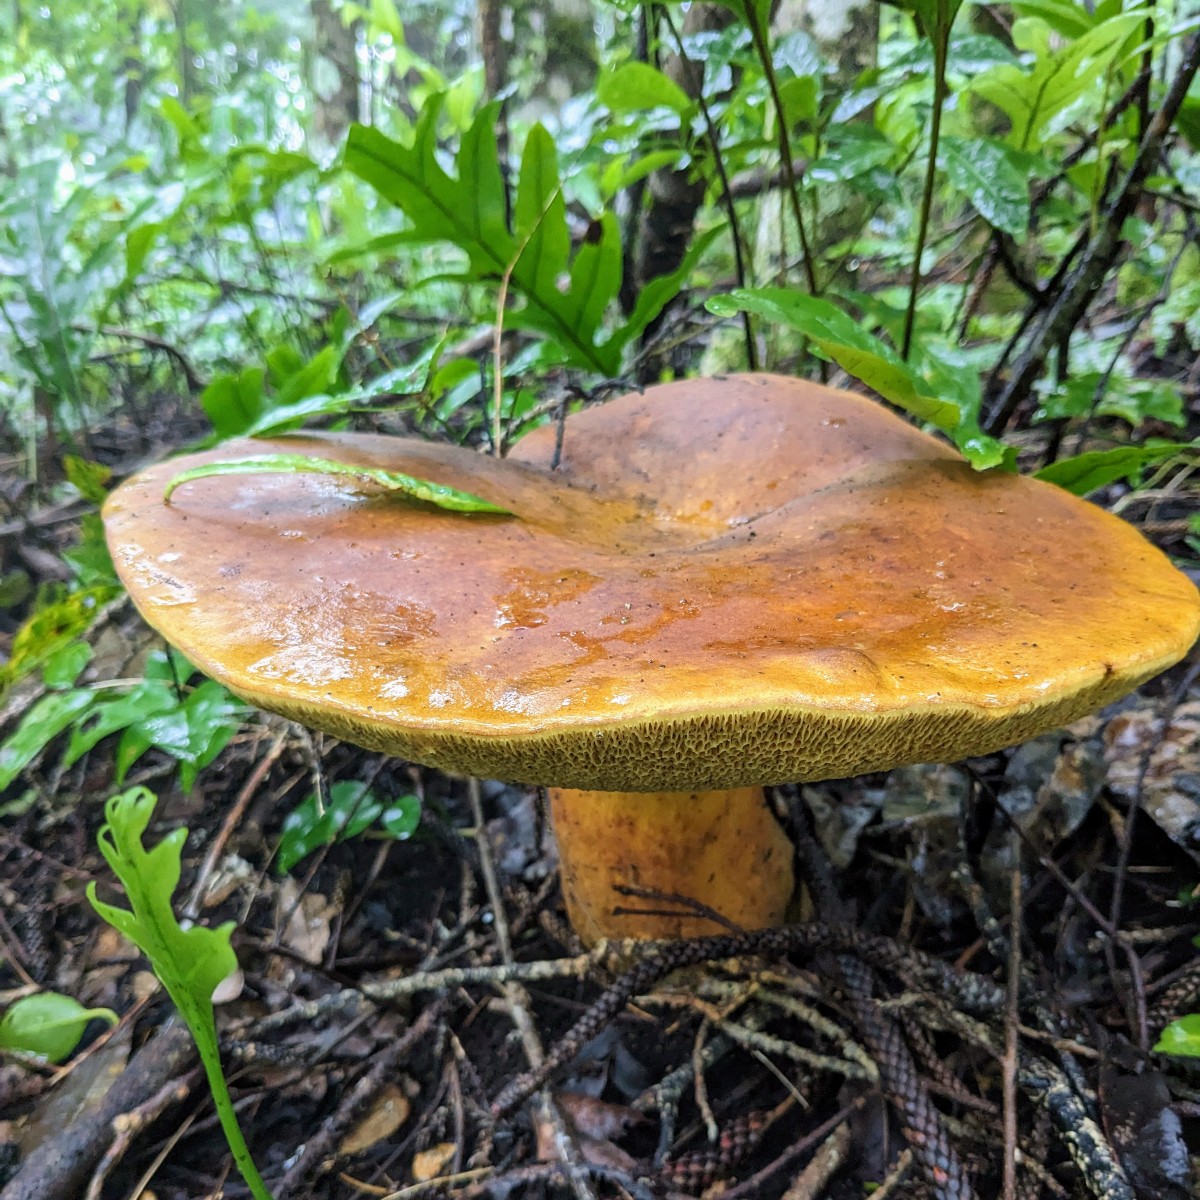 Happy Fungi Friday Norfolk Island National Park and Botanic Garden 🍄 Spotted by one of our rangers, this fungi is called a Boletus, but locally it is known as 'Poor mans bread'. ⚠️ Please look and don't touch, foraging for fungi is not allowed in the national park.